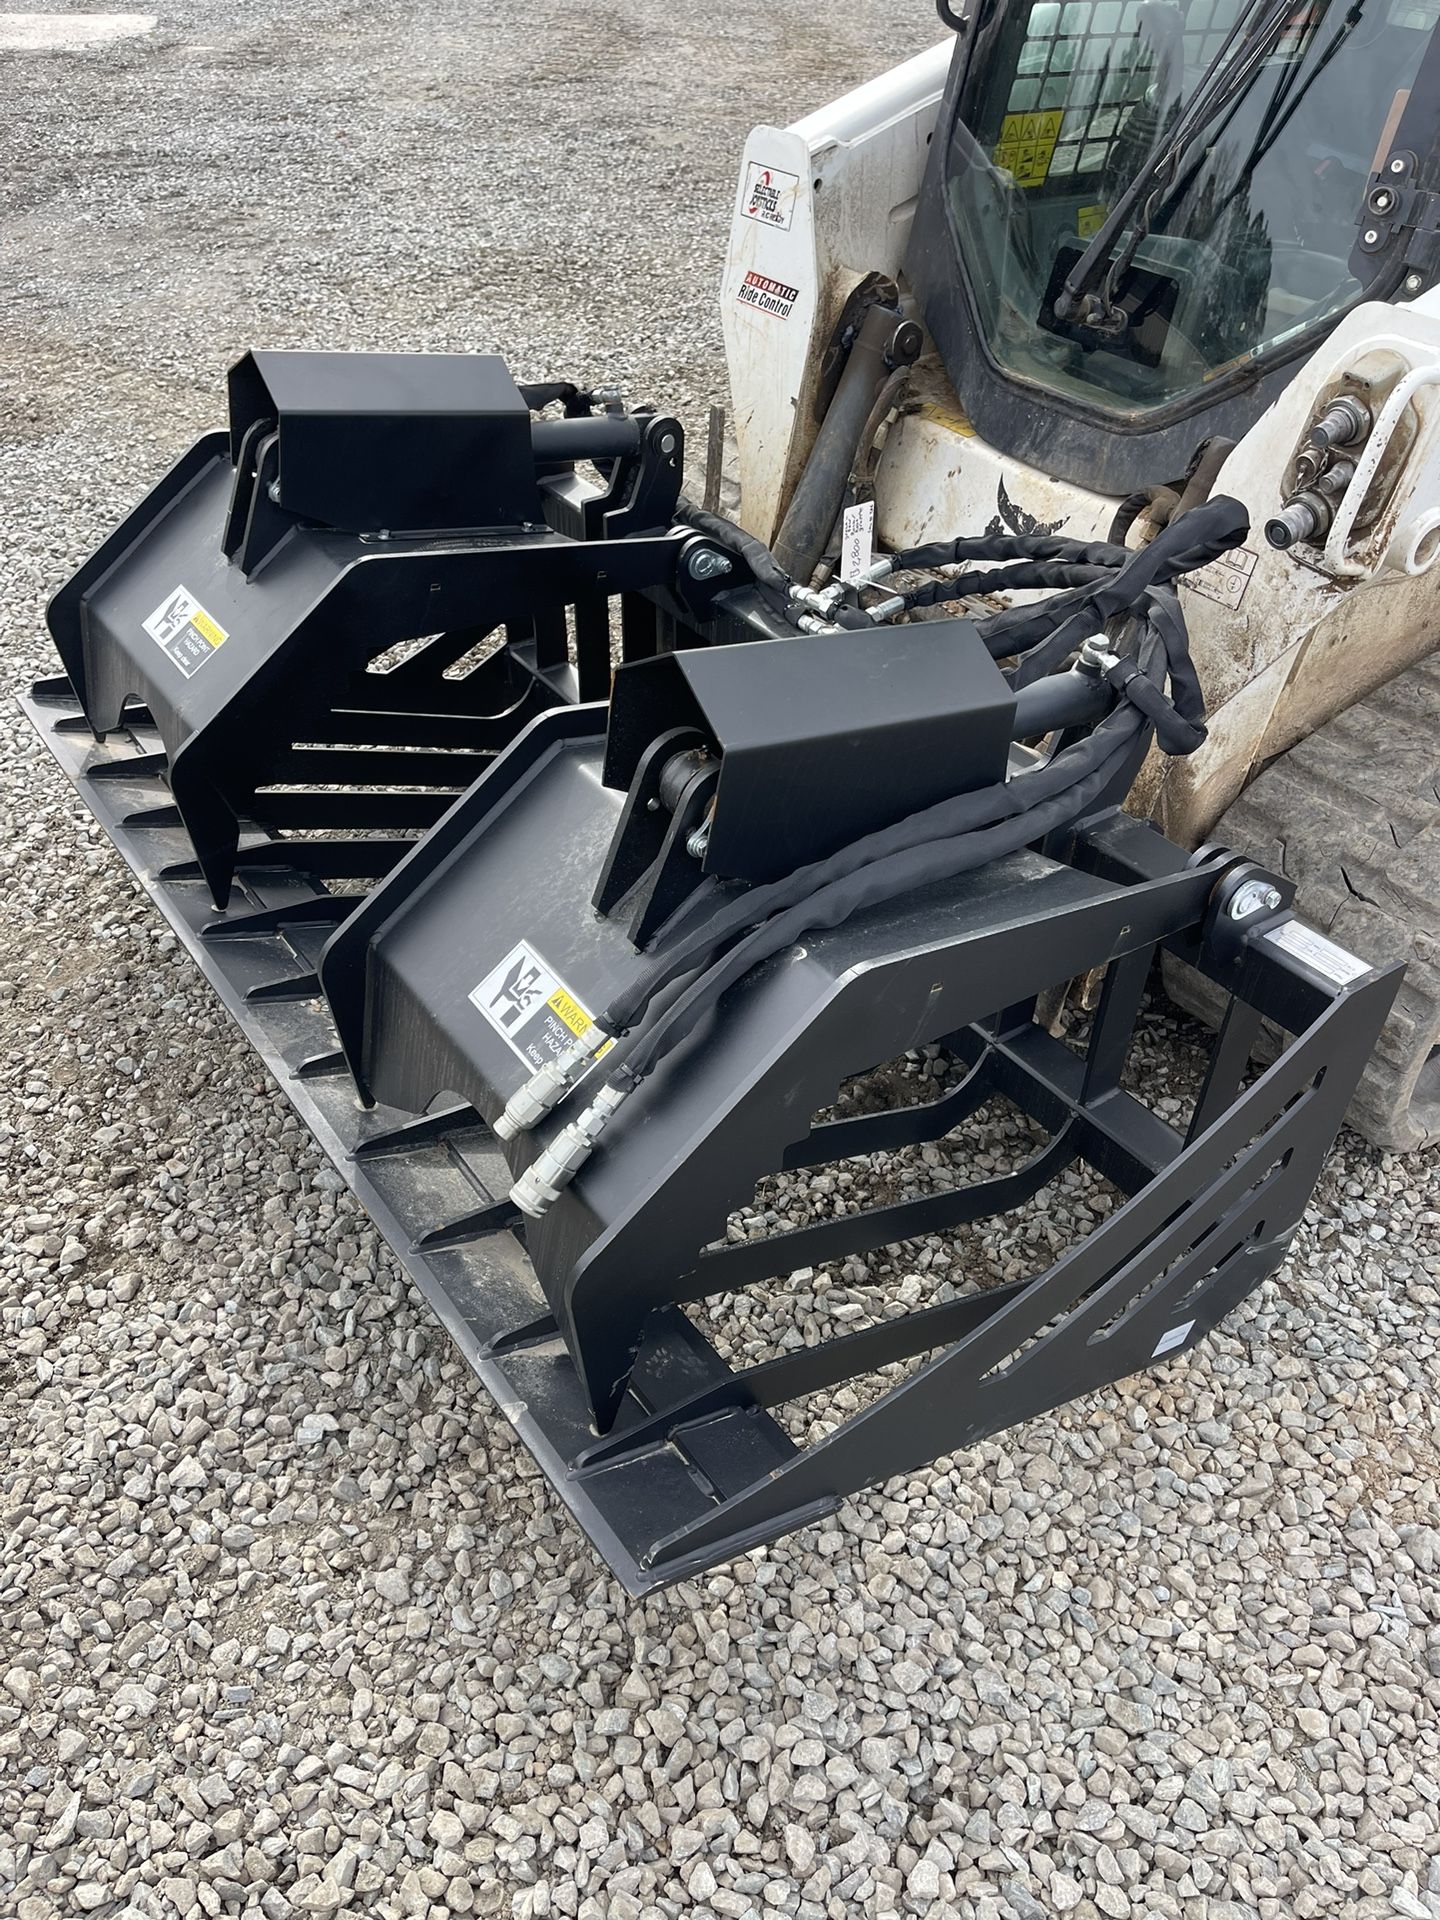 72” Rock Log Grapple Attachment for Skid Steer